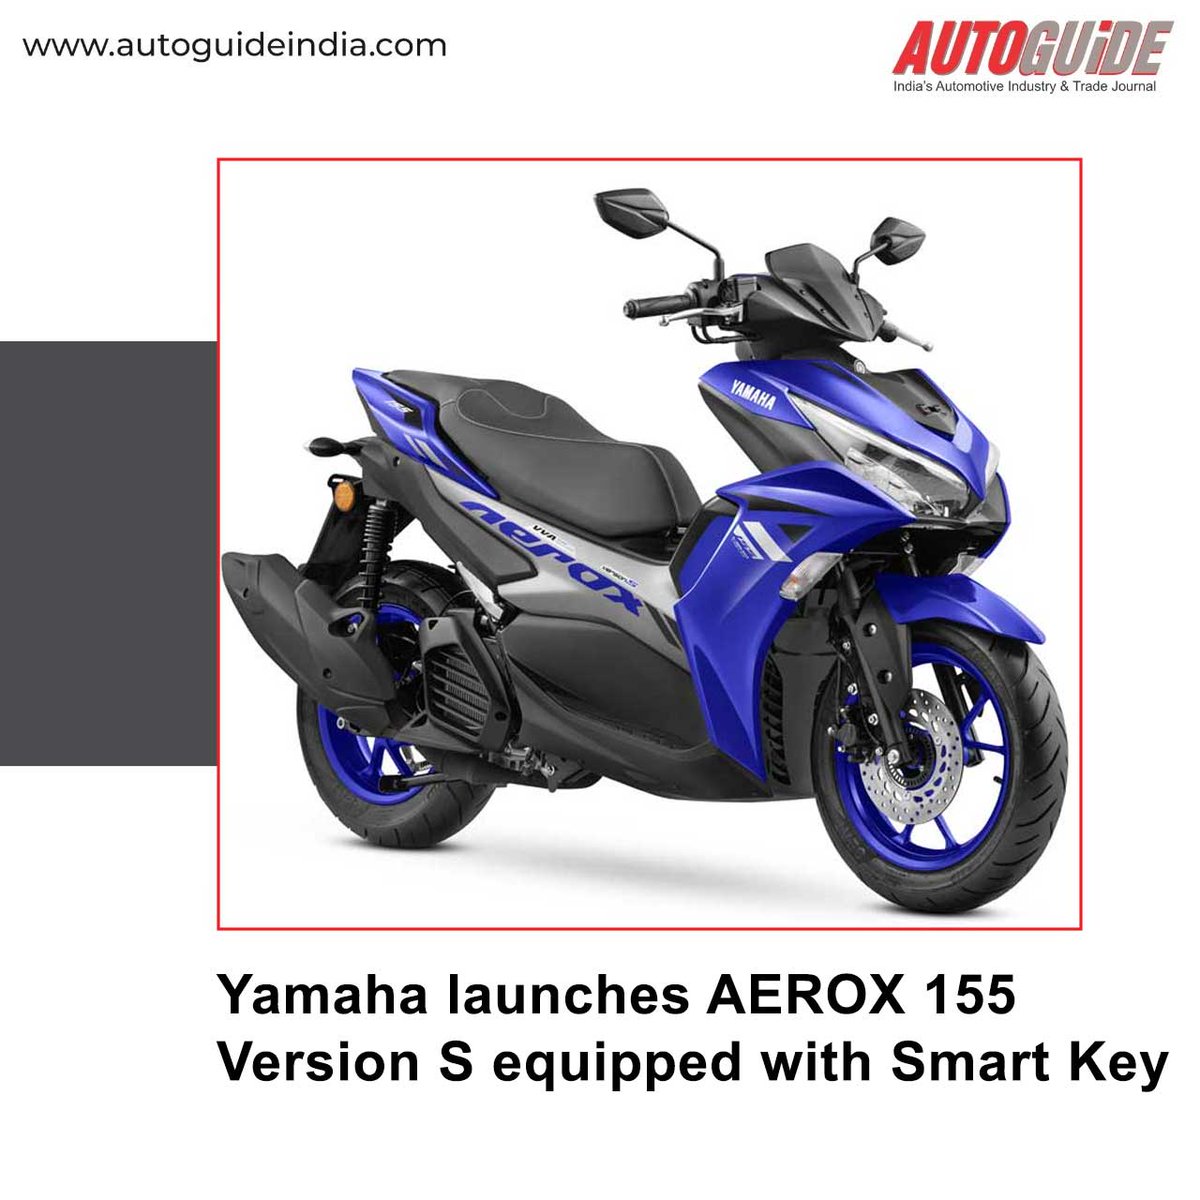 autoguideindia.com/new-launches/y…
AEROX 155 Version S exclusively available in the Silver and Racing Blue colour shades.
#YamahaMotorIndia #YamahaAerox #twowheeler #motorcycle #twowheelerindustry